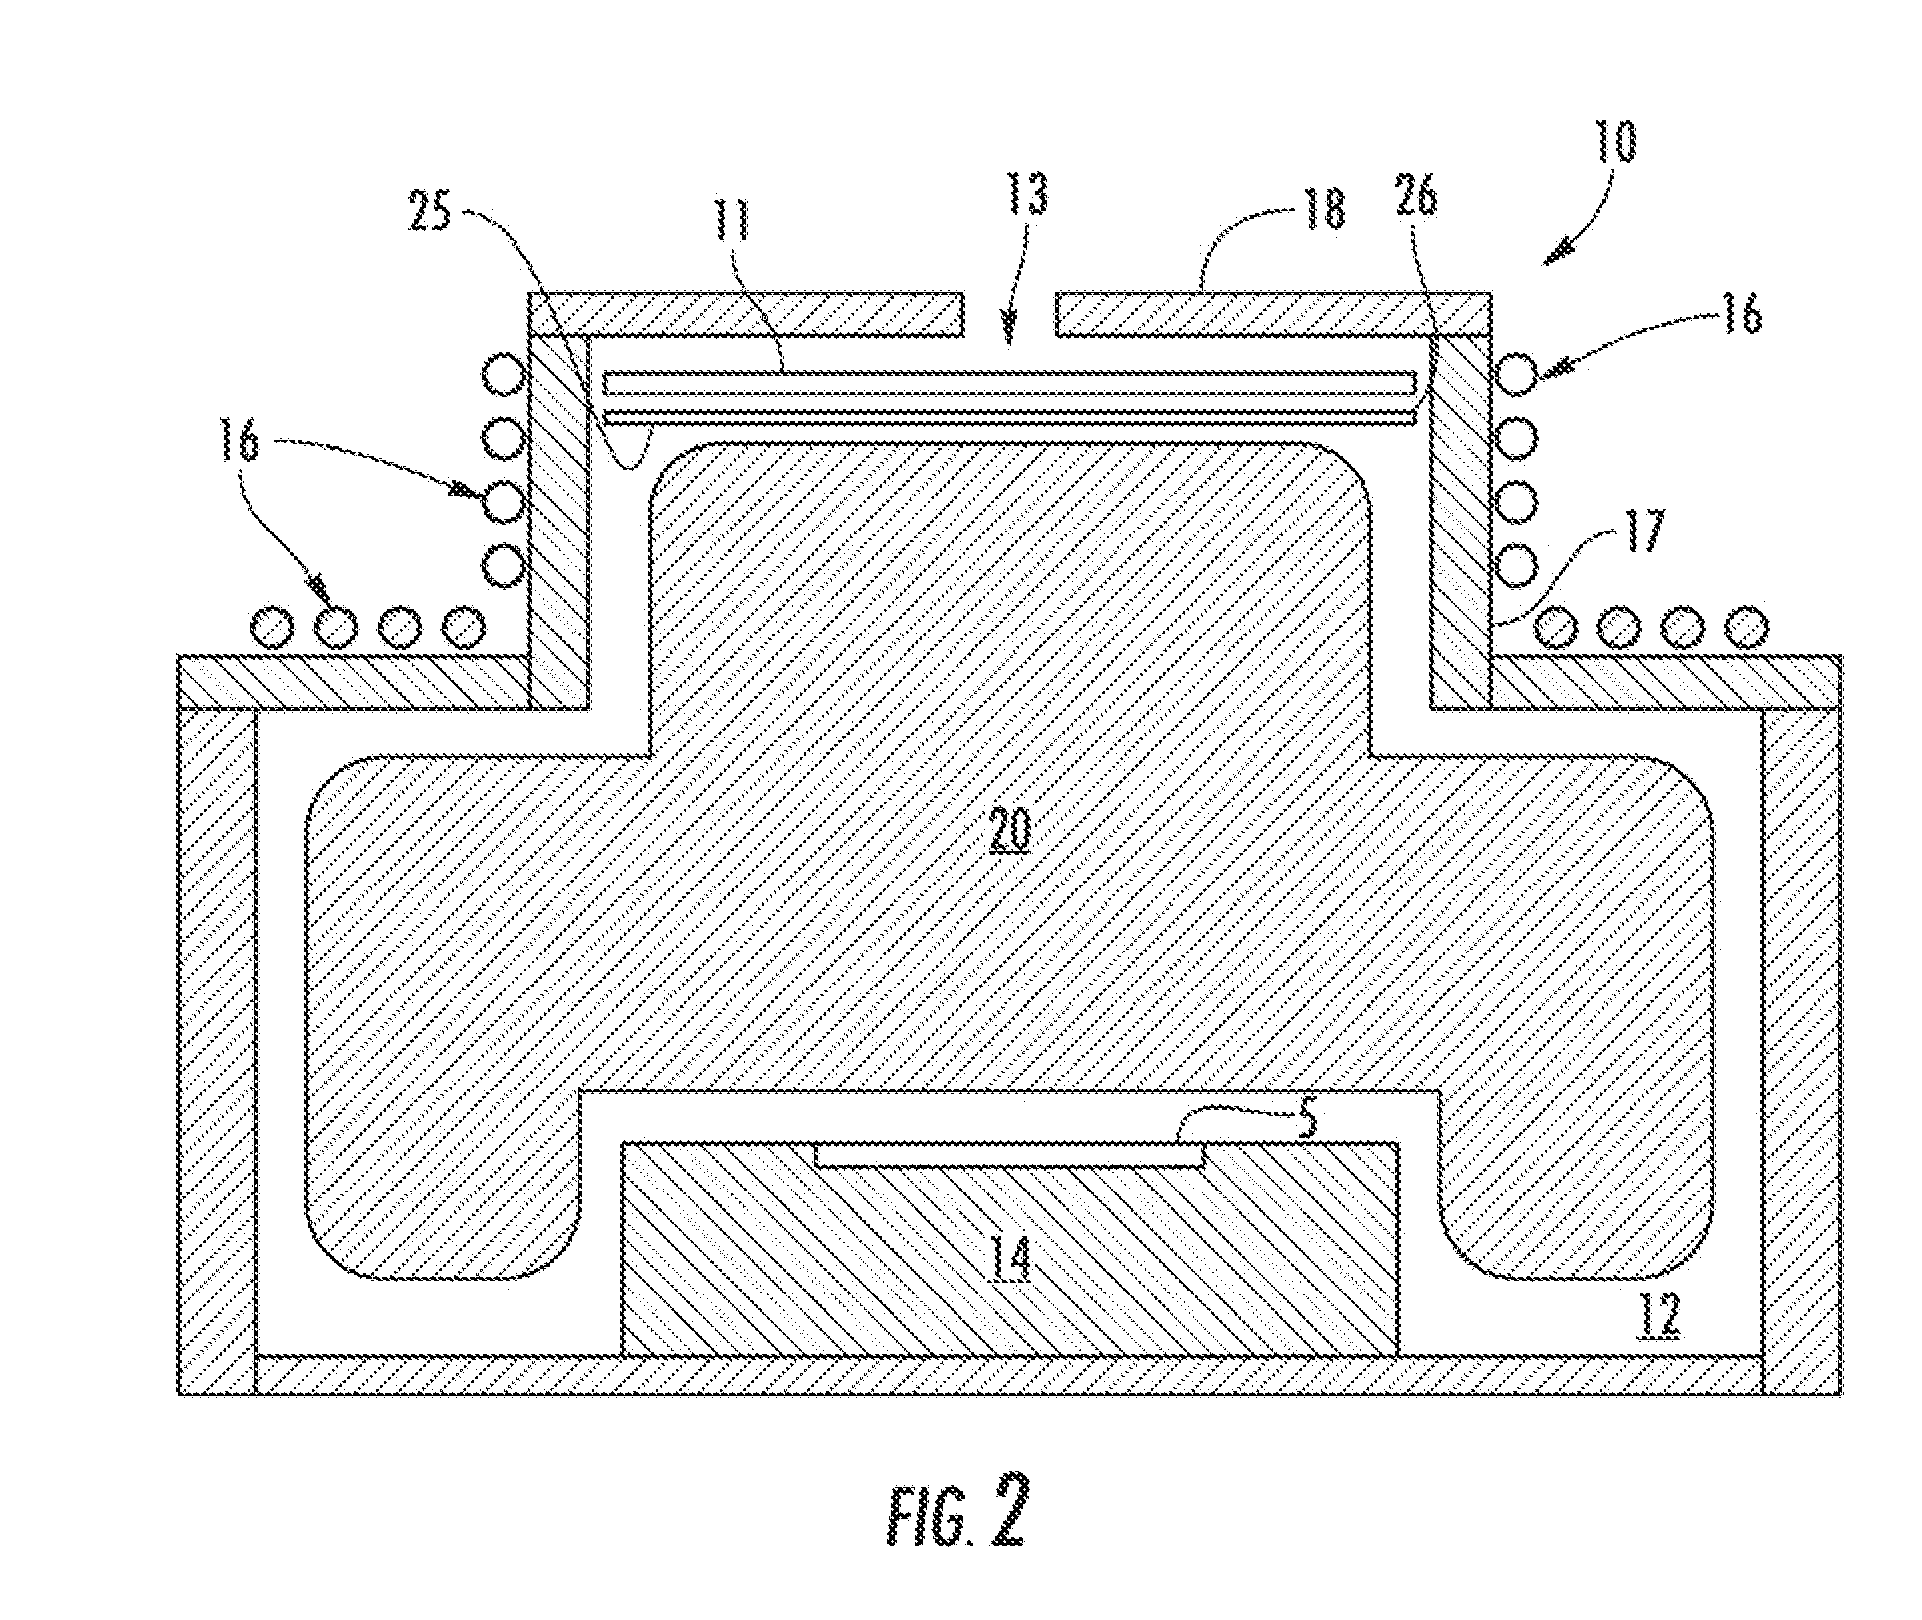 Control apparatus for plasma immersion ion implantation of a dielectric substrate